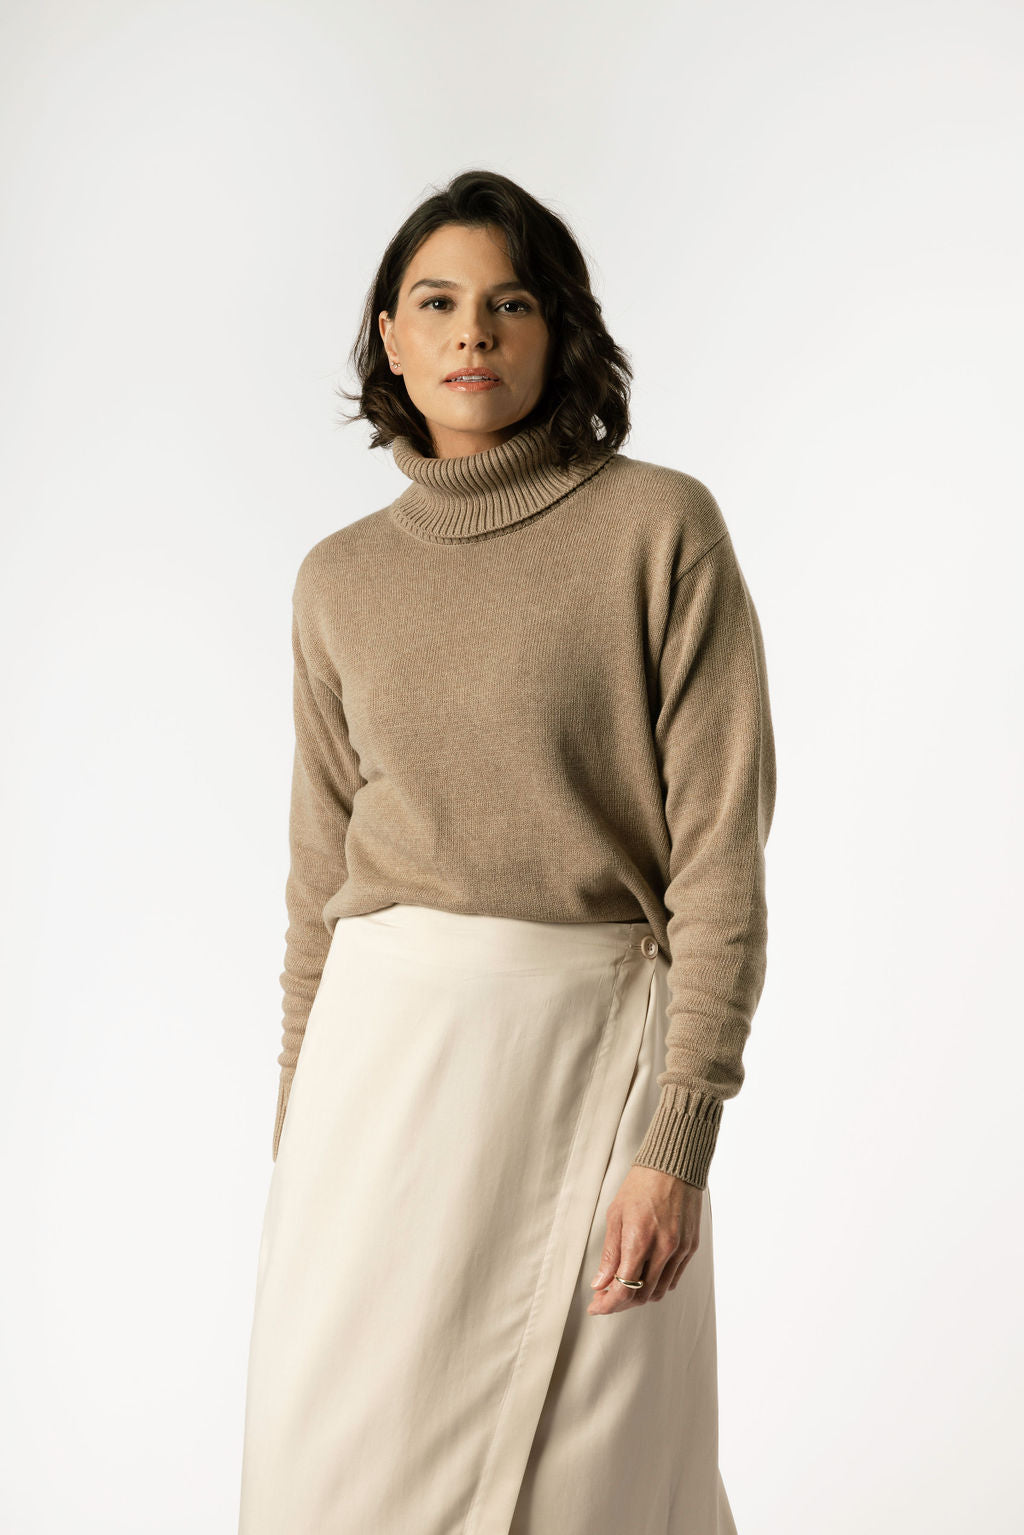 Minimalist Capsule Wardrobe 100% Organic Cotton Cozy Brown Cowl Neck Sweater Paired with Skirt